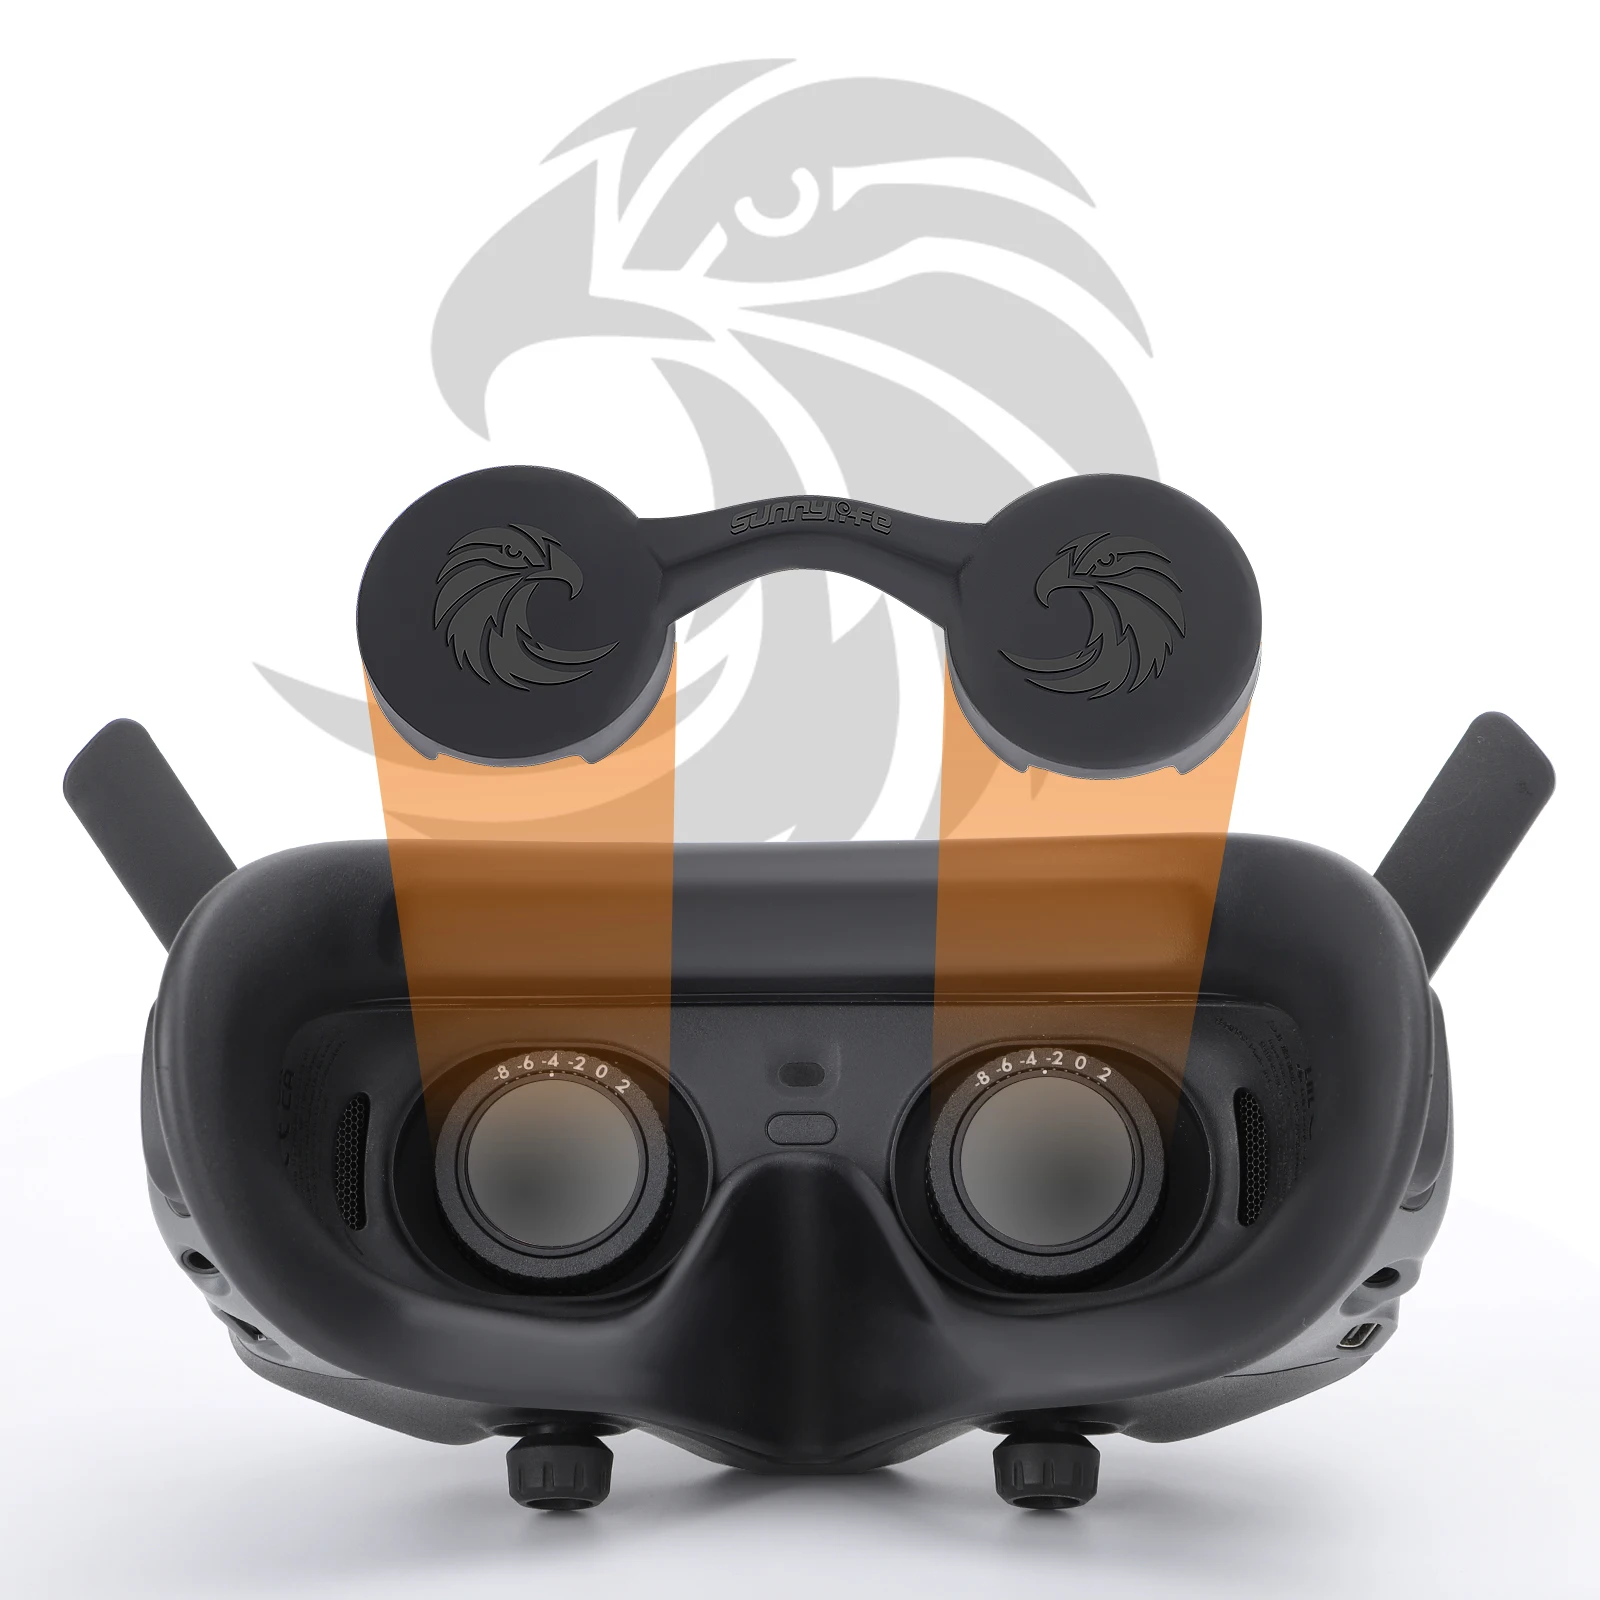 

Sunnylife for DJI Avata Lens Protective Cover Goggles2 Dust and scratch resistant VR Glasses Silicone Cover Protective Cover-G